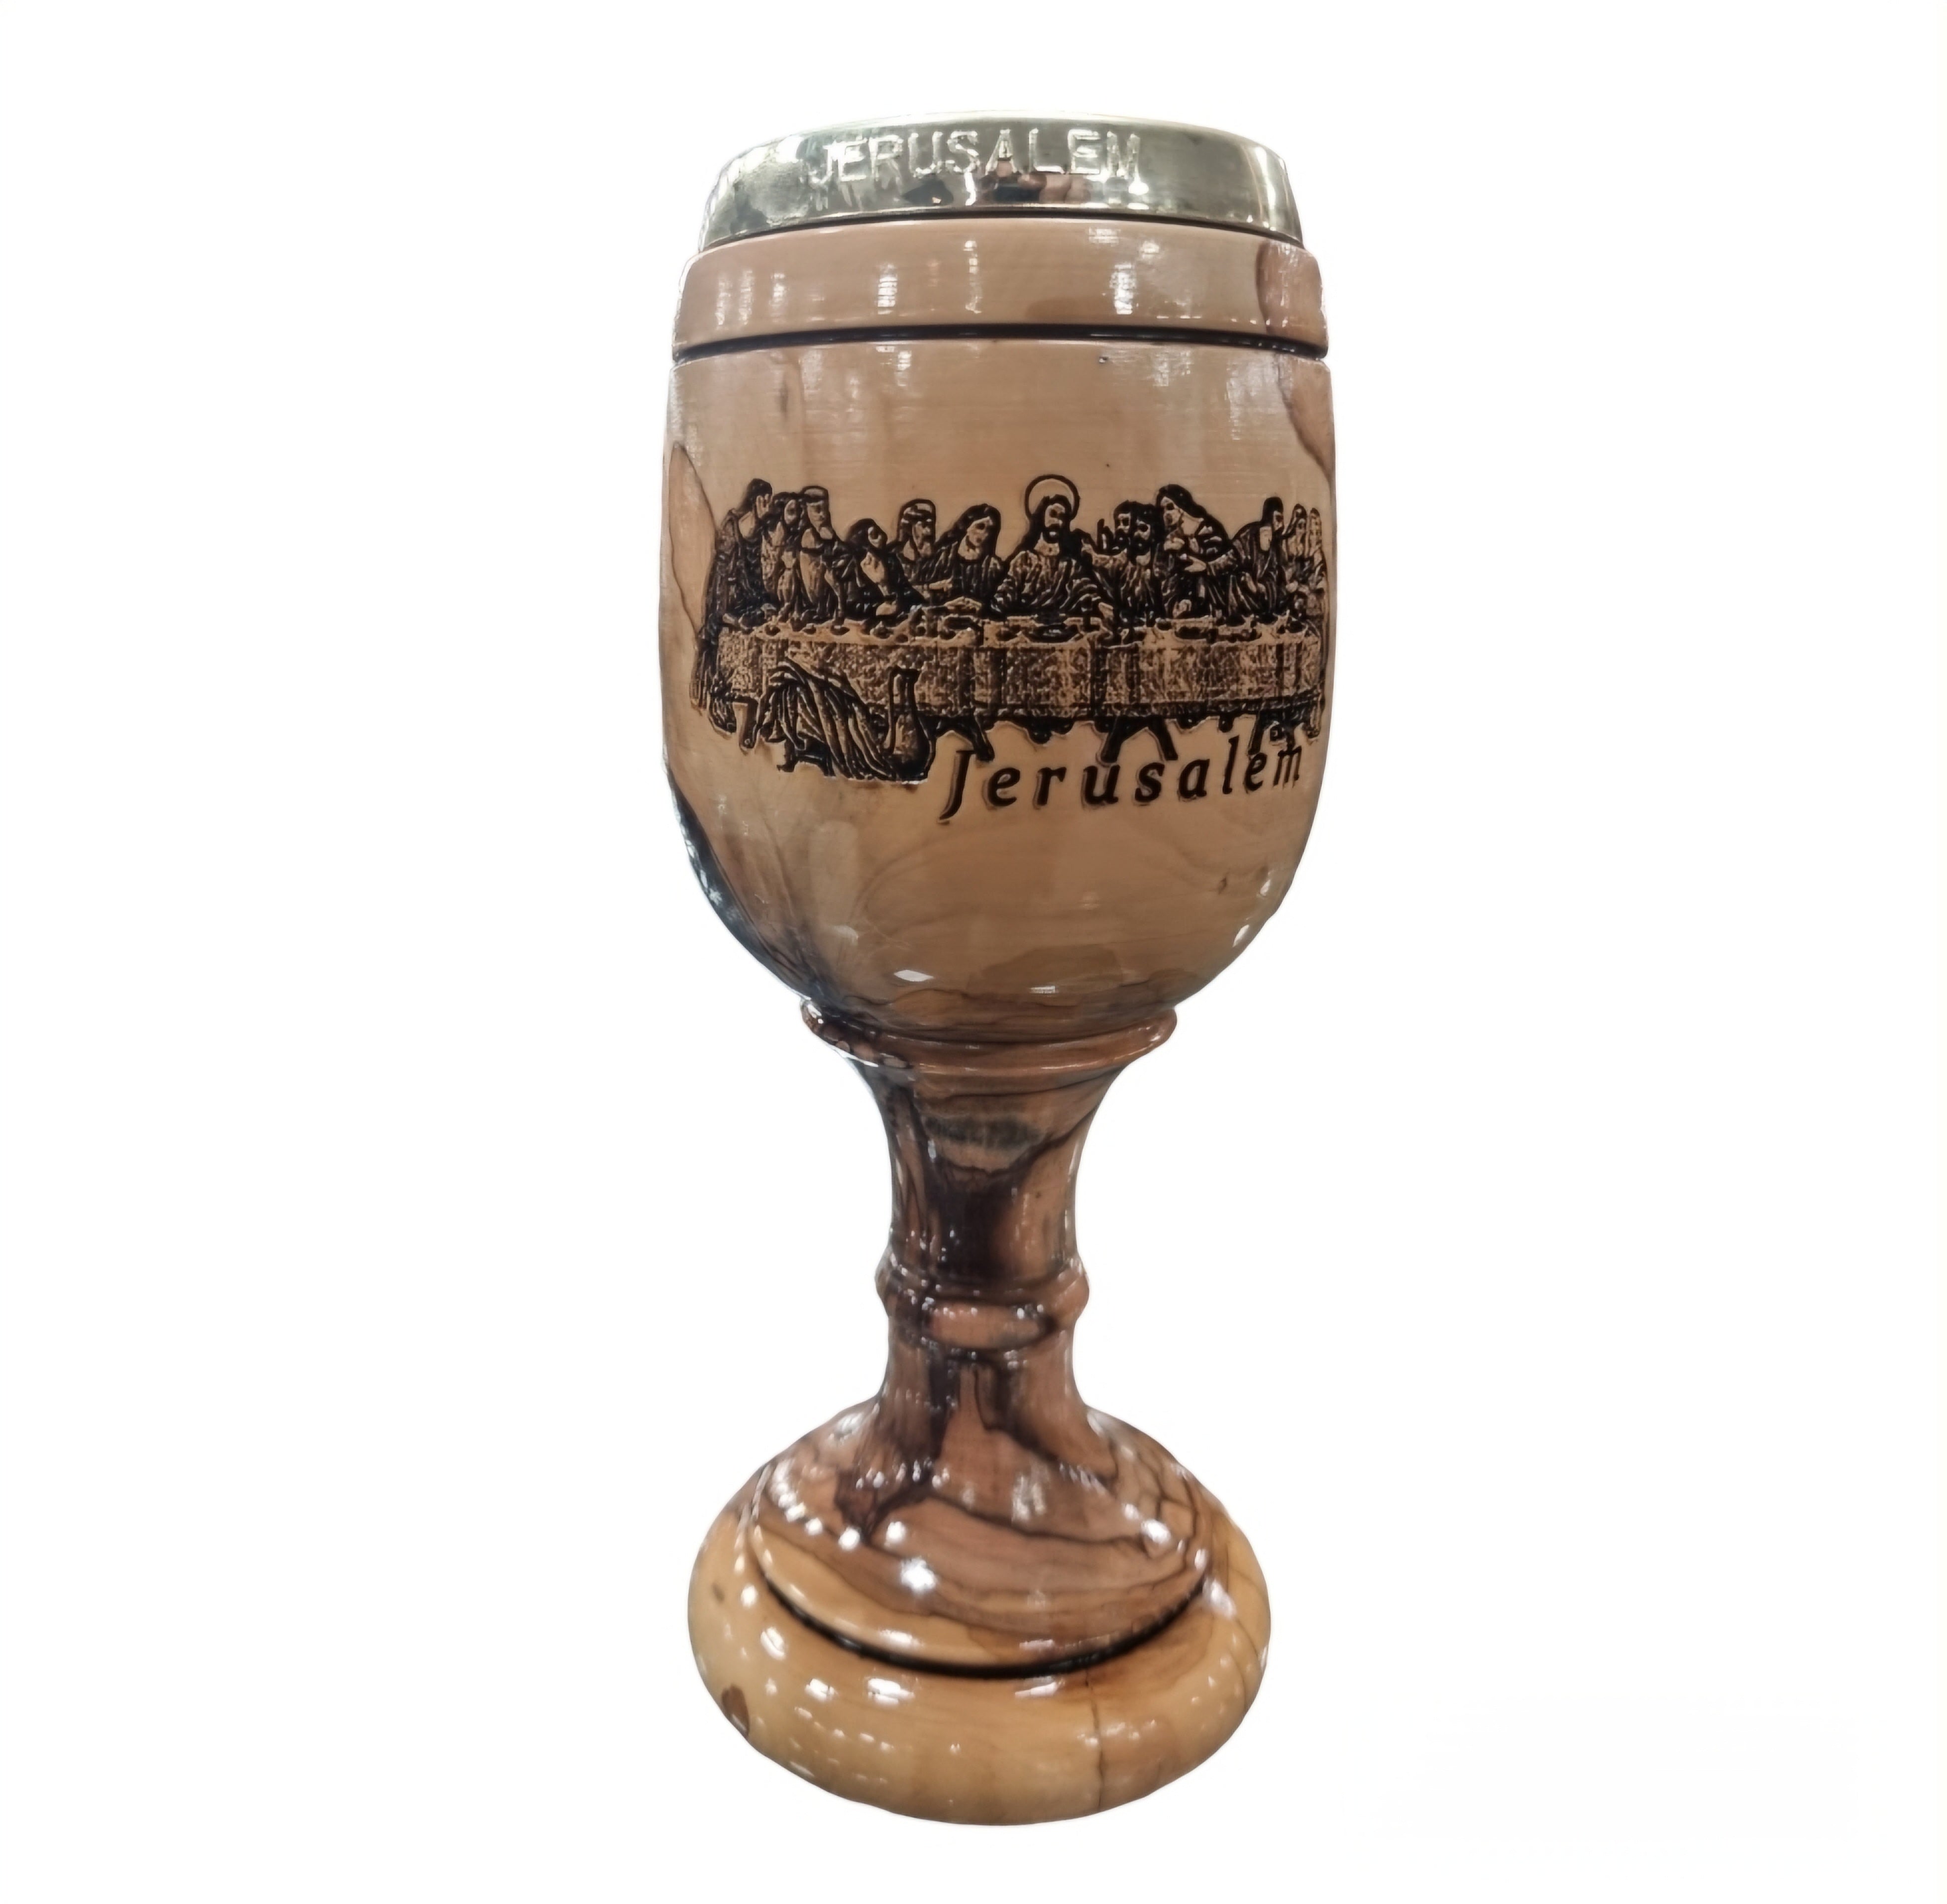 Handcrafted Holy Land Olivewood Chalice - The Last Supper (20.5 cm)